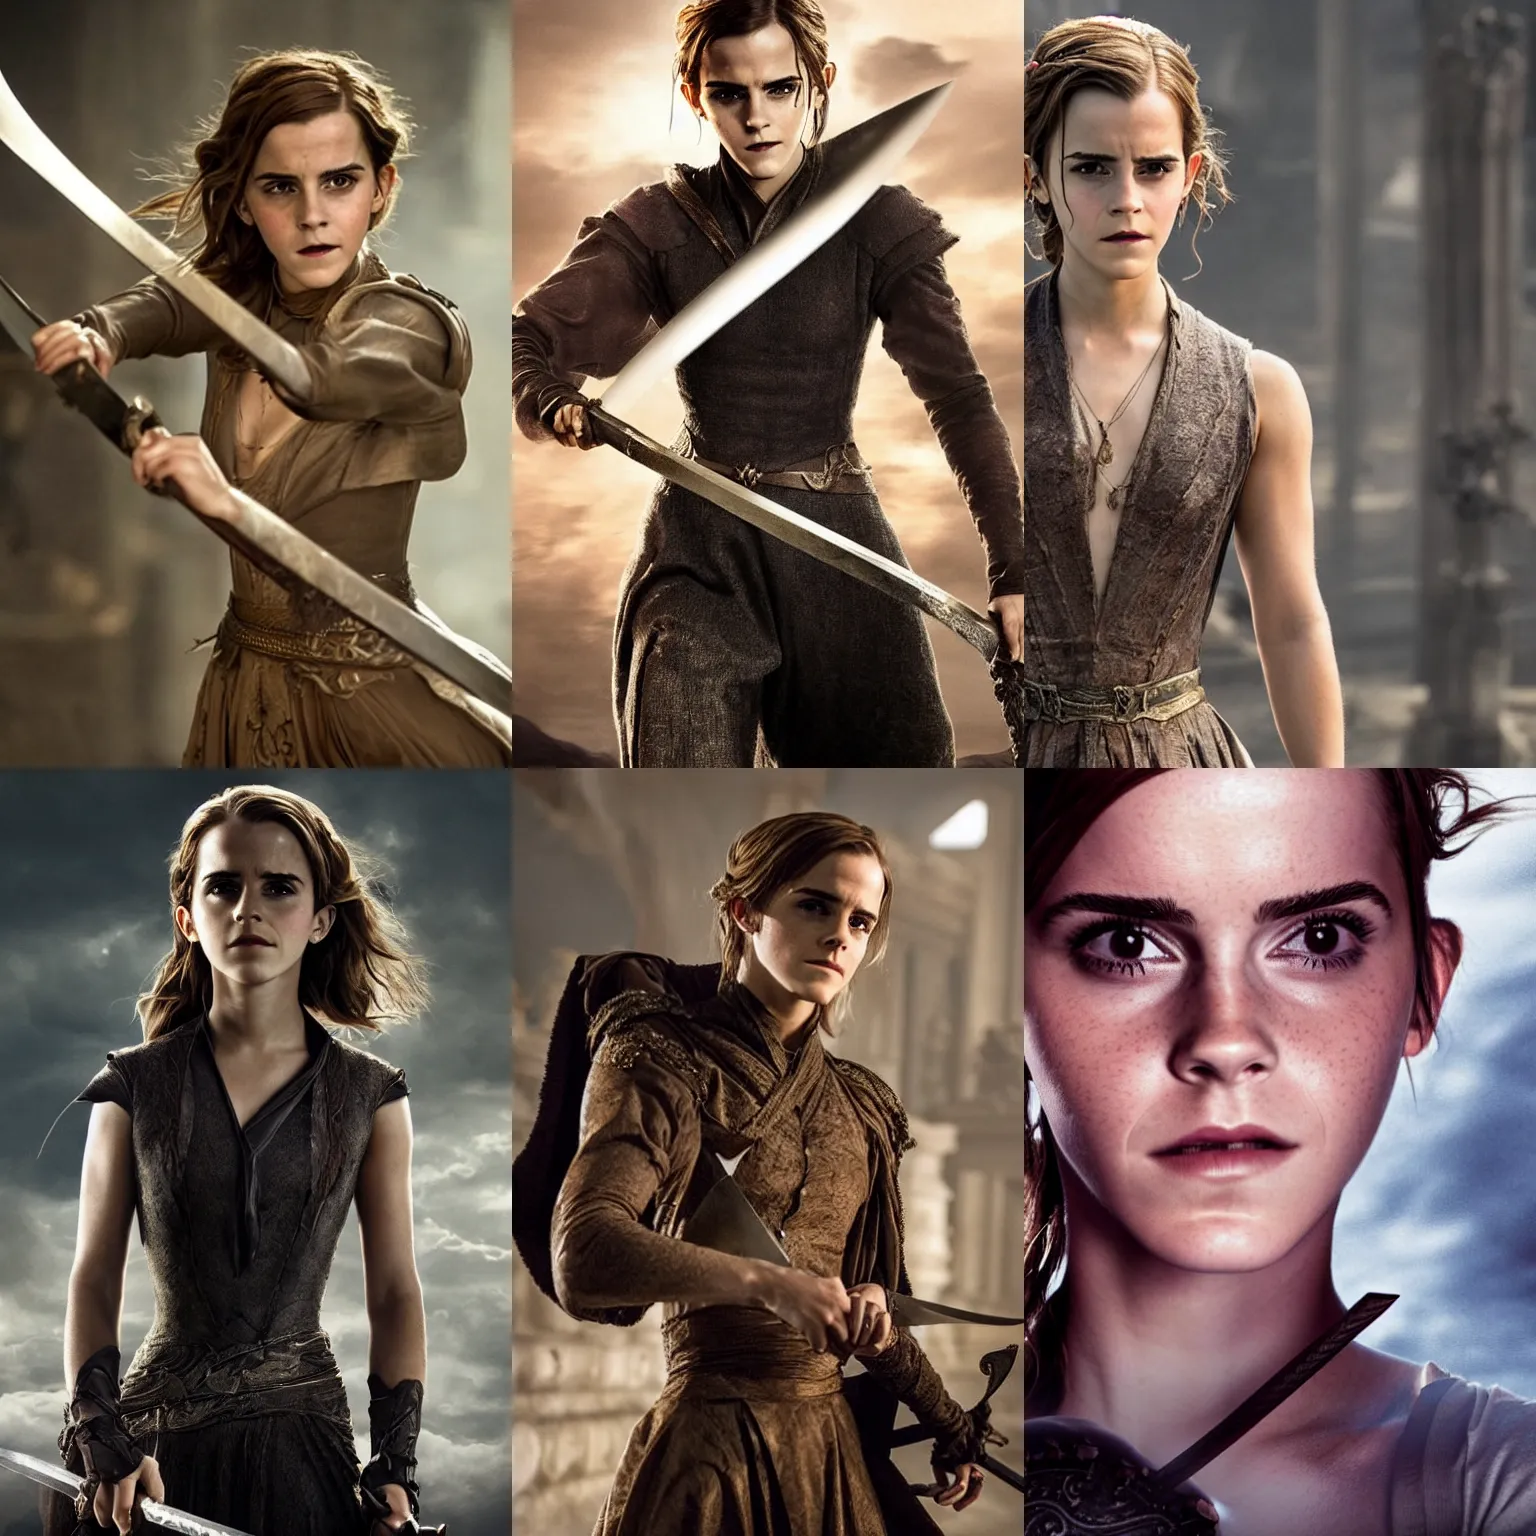 Prompt: promotional image of emma watson in a new movie as the villain, carrying a sword, alluring, intriguing, threatening, detailed face, movie still frame, promotional image, imax 7 0 mm footage